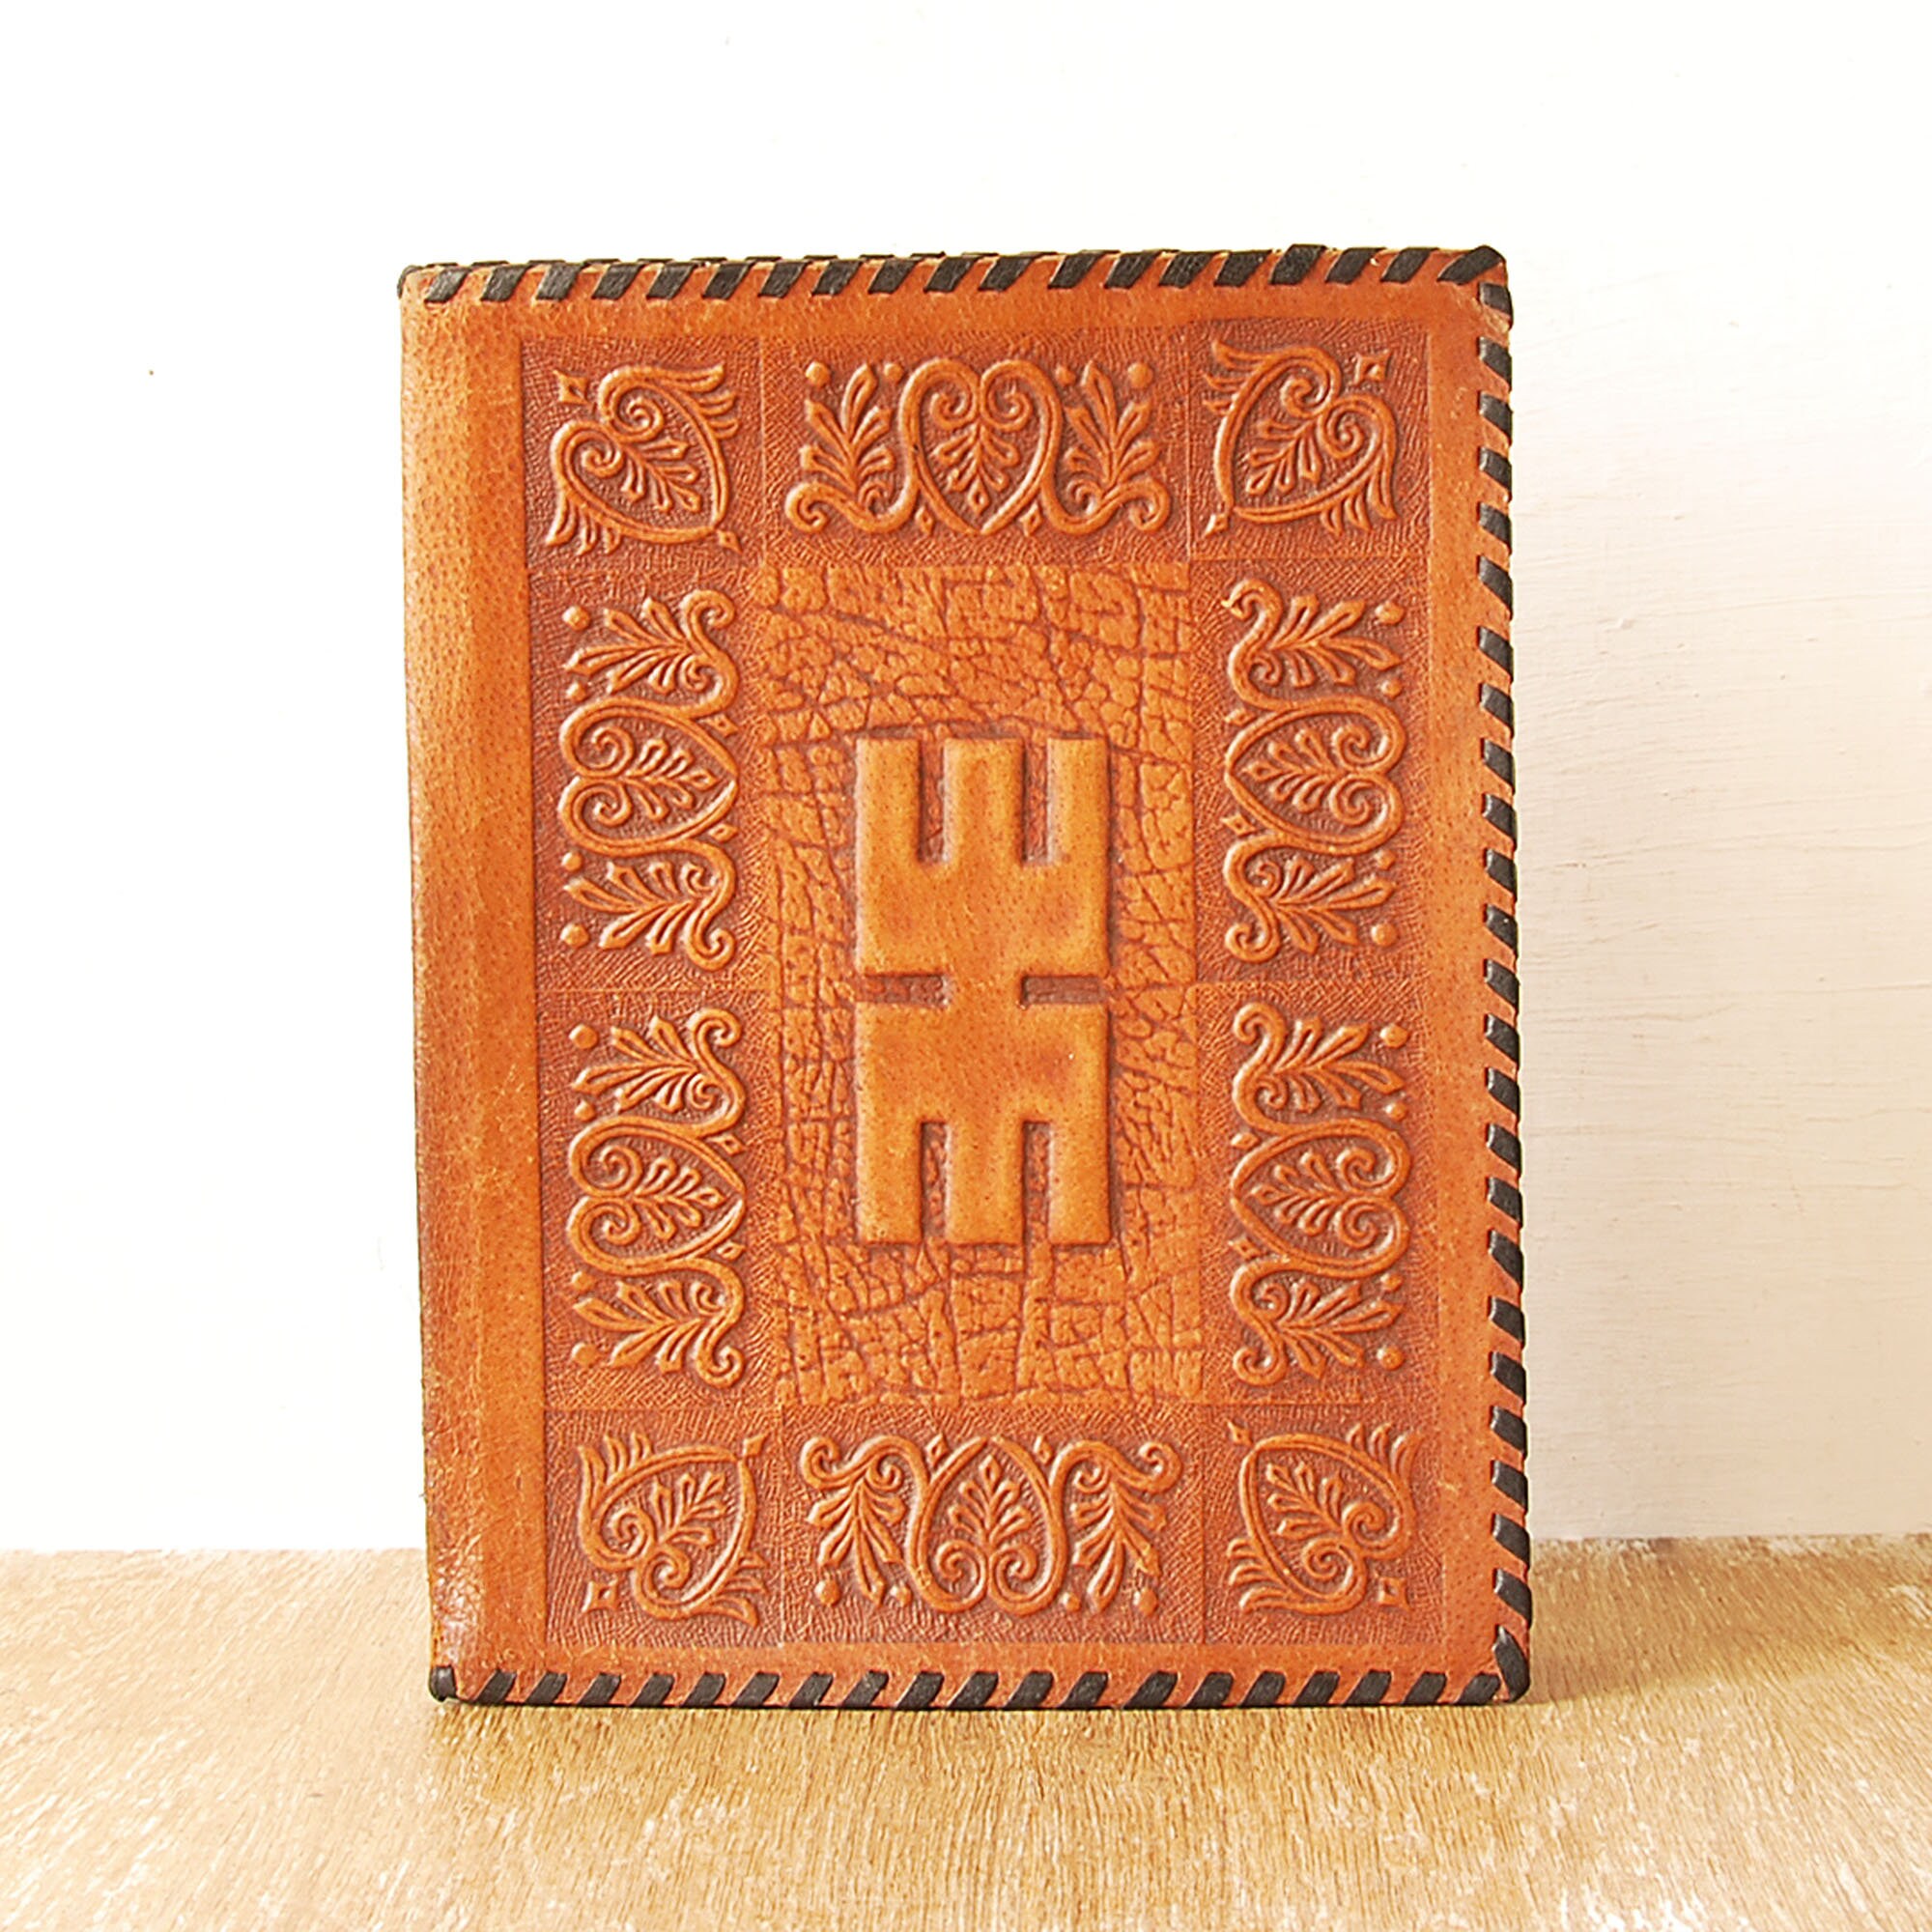 Dark Antique Old Leather Background. Very old, worn leather book cover with  lots , #AD, #book, #leather, #lots, #cove…